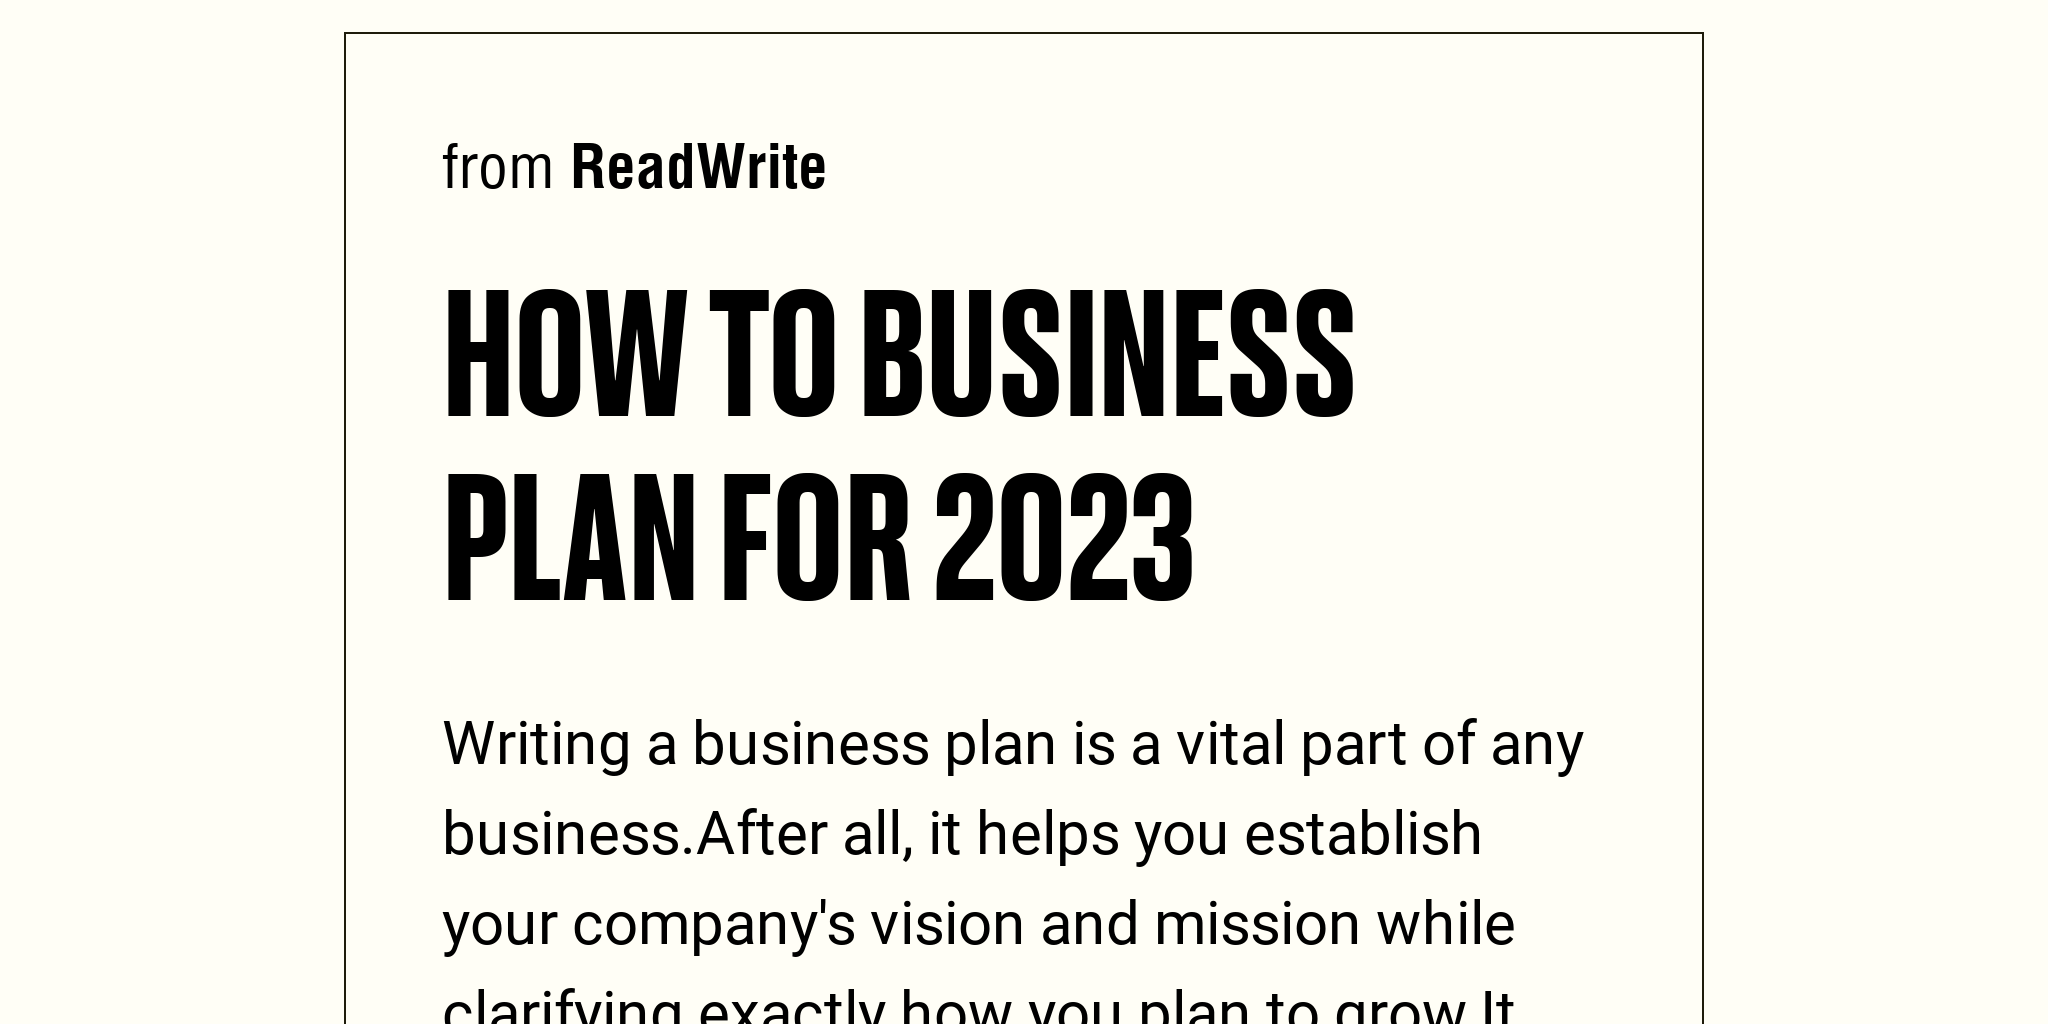 briefly explain about business plan